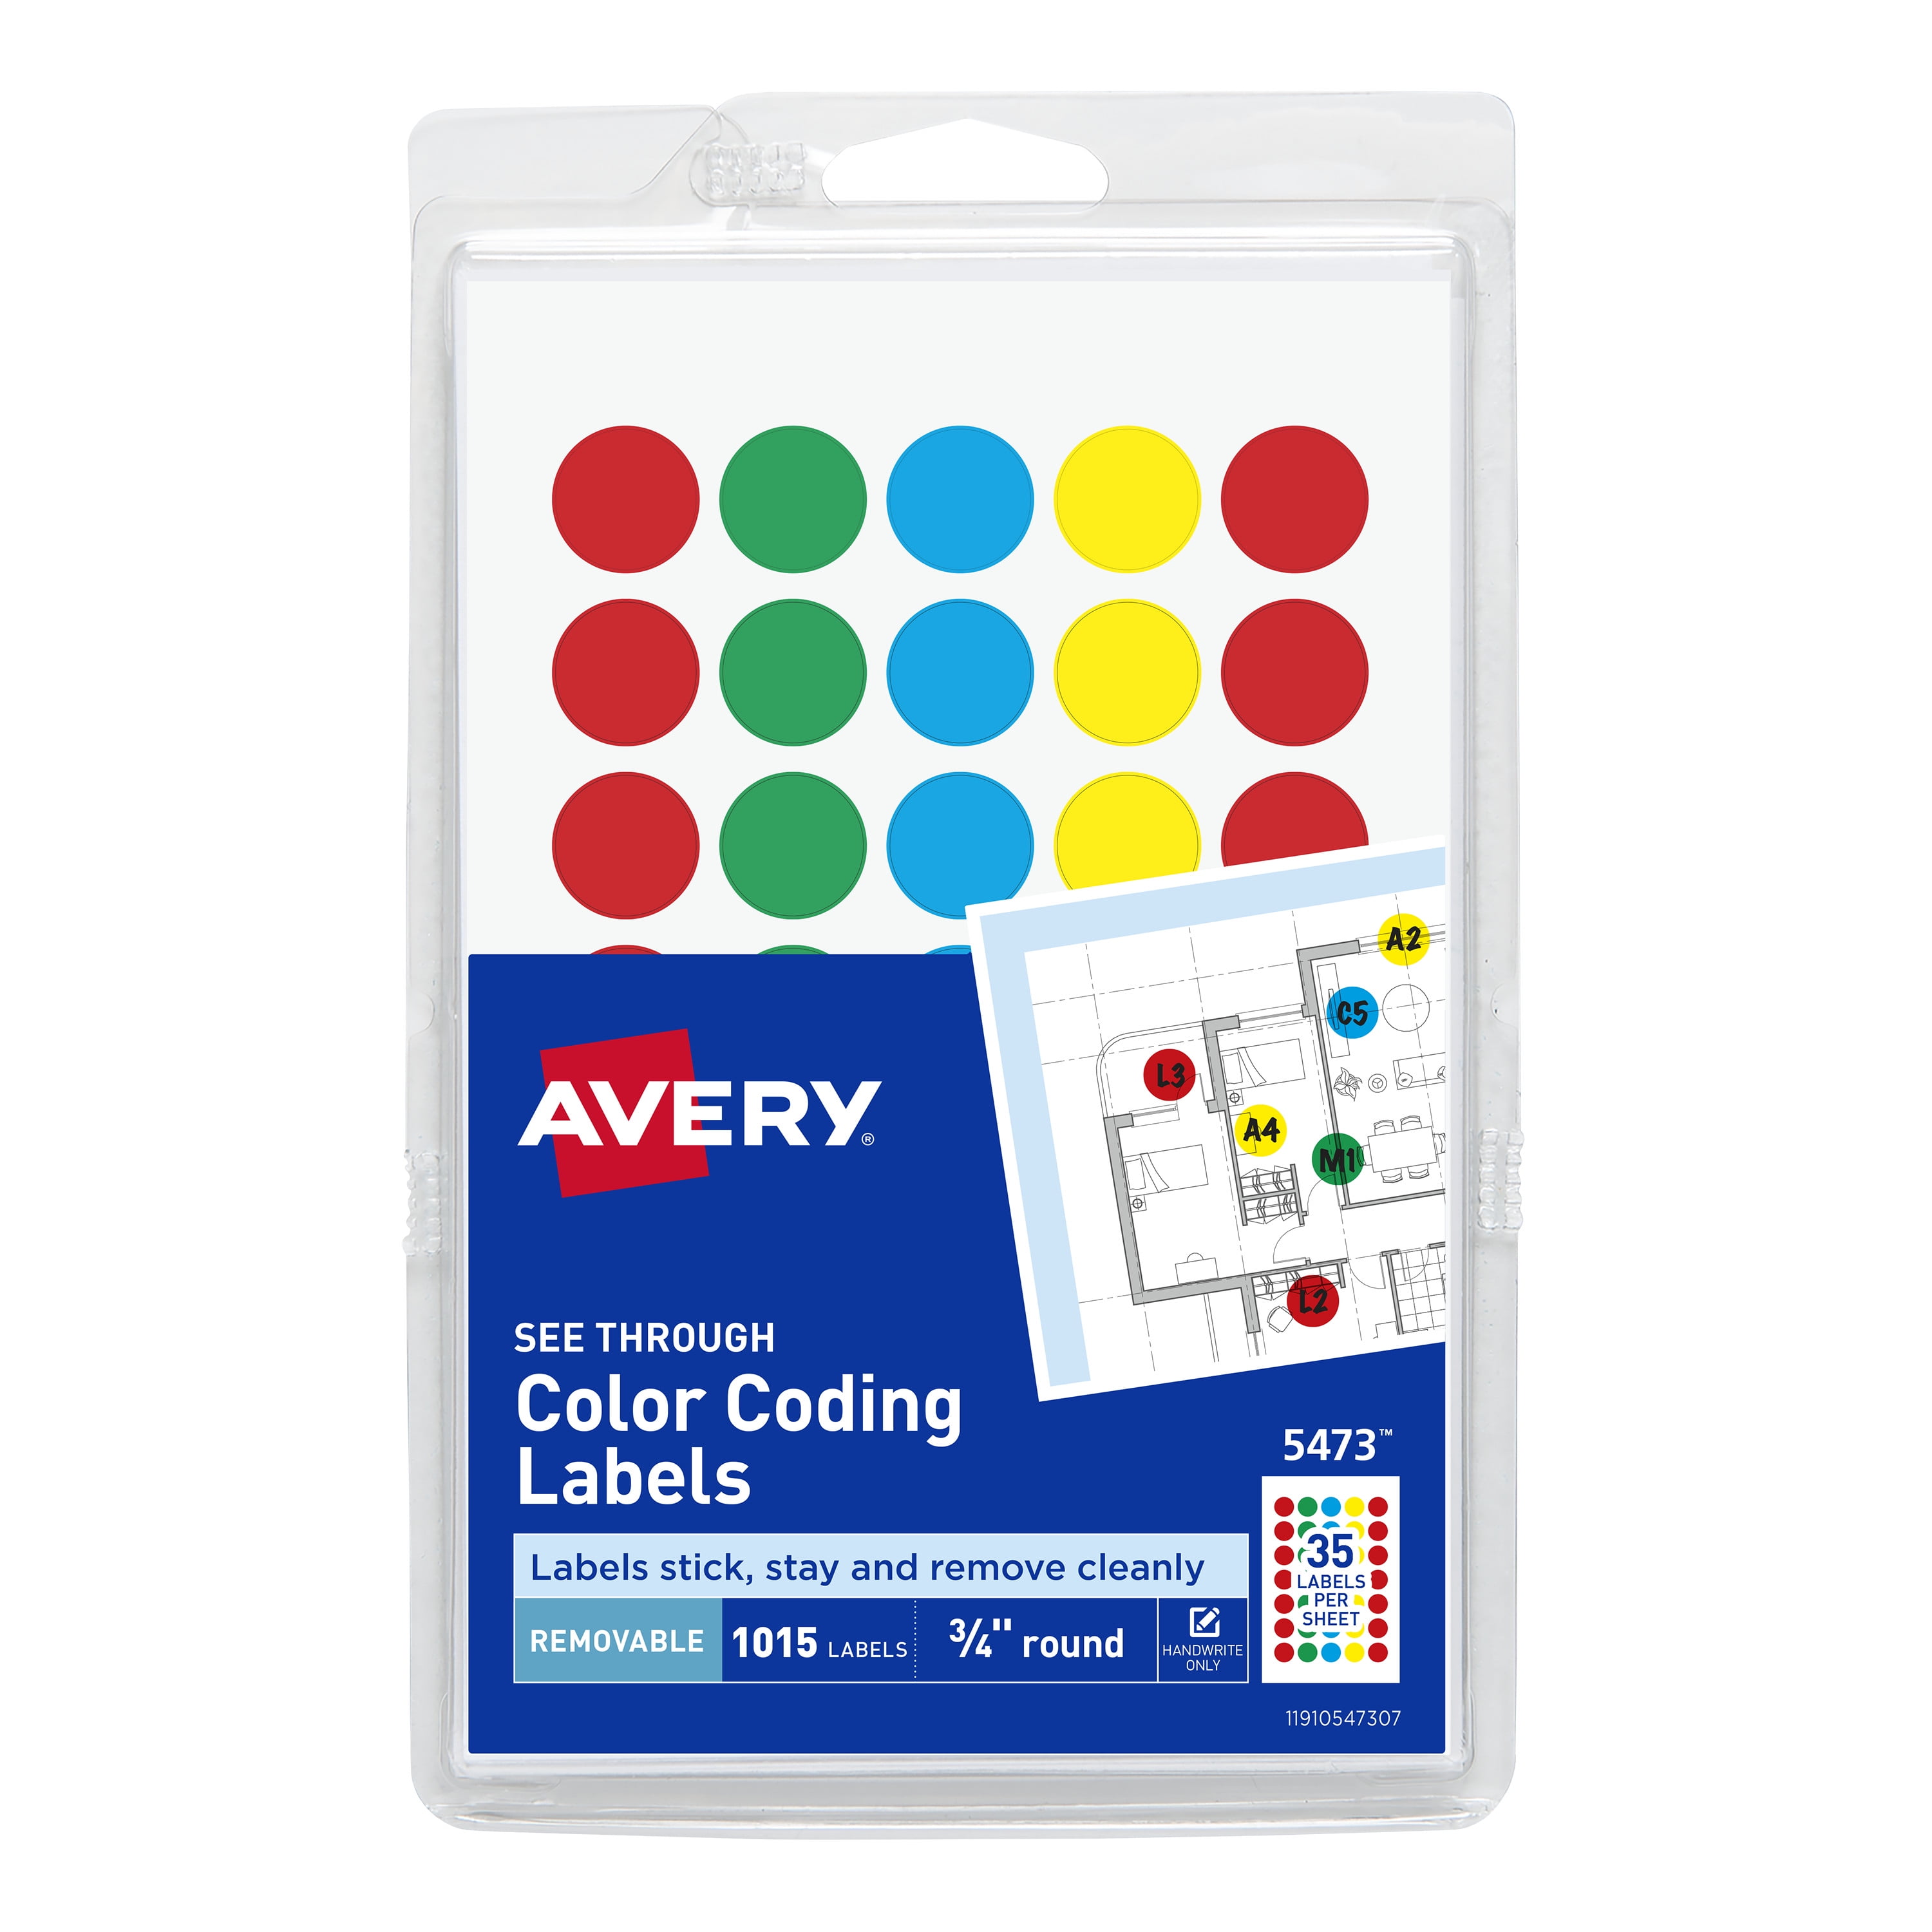 Removable A4 Sheets Stick & Peel Stickers 8 White Peelable Printer Labels 